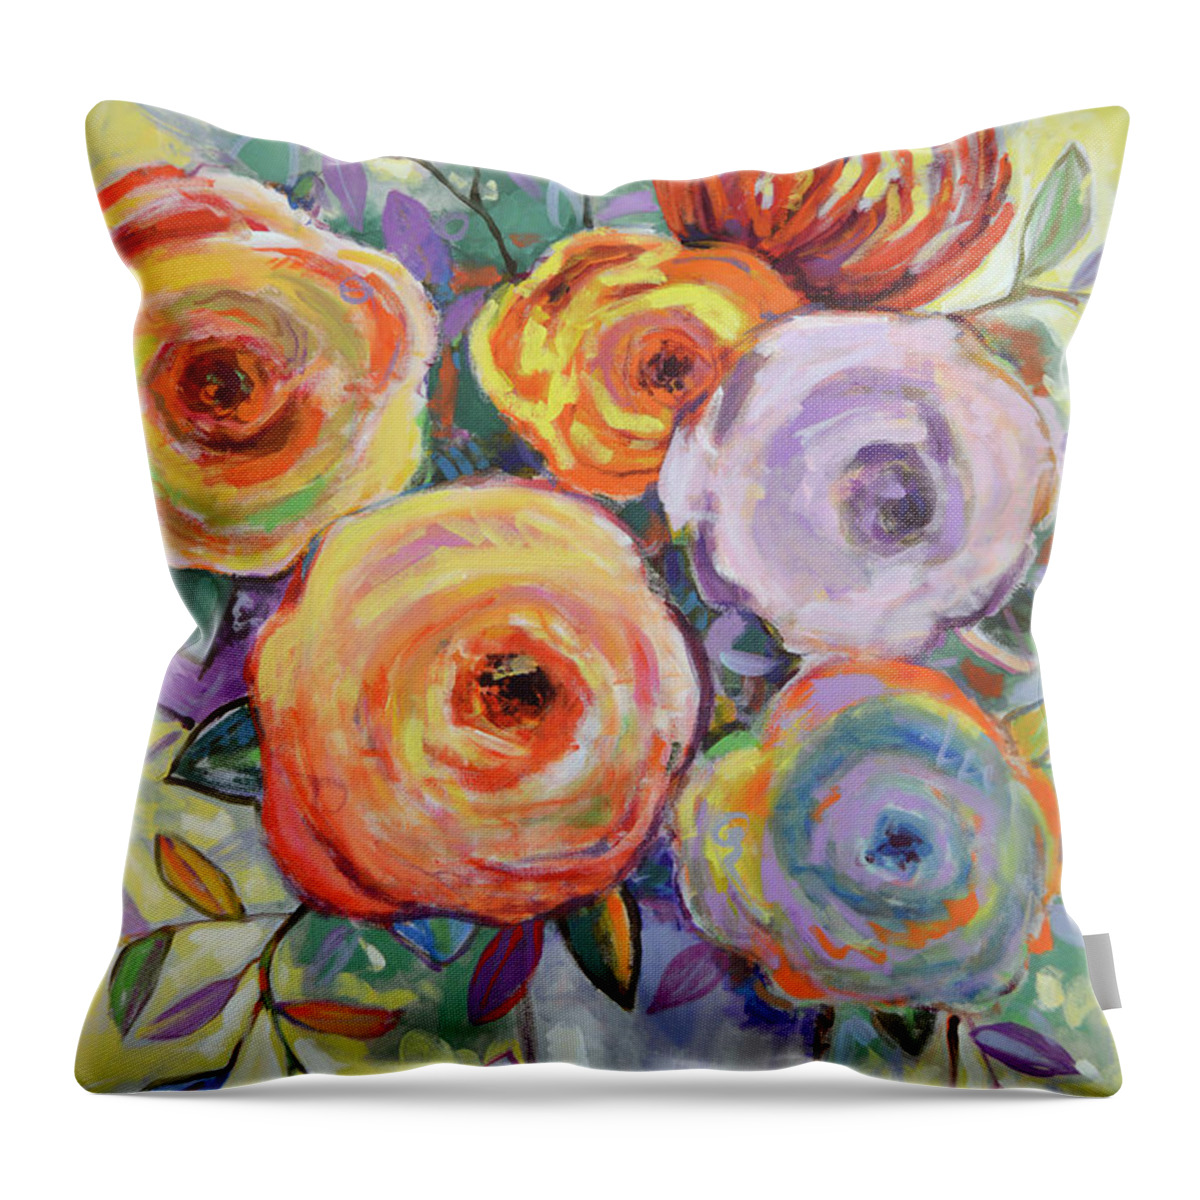 Flowers Throw Pillow featuring the painting Gathered Blooms by Amy Giacomelli